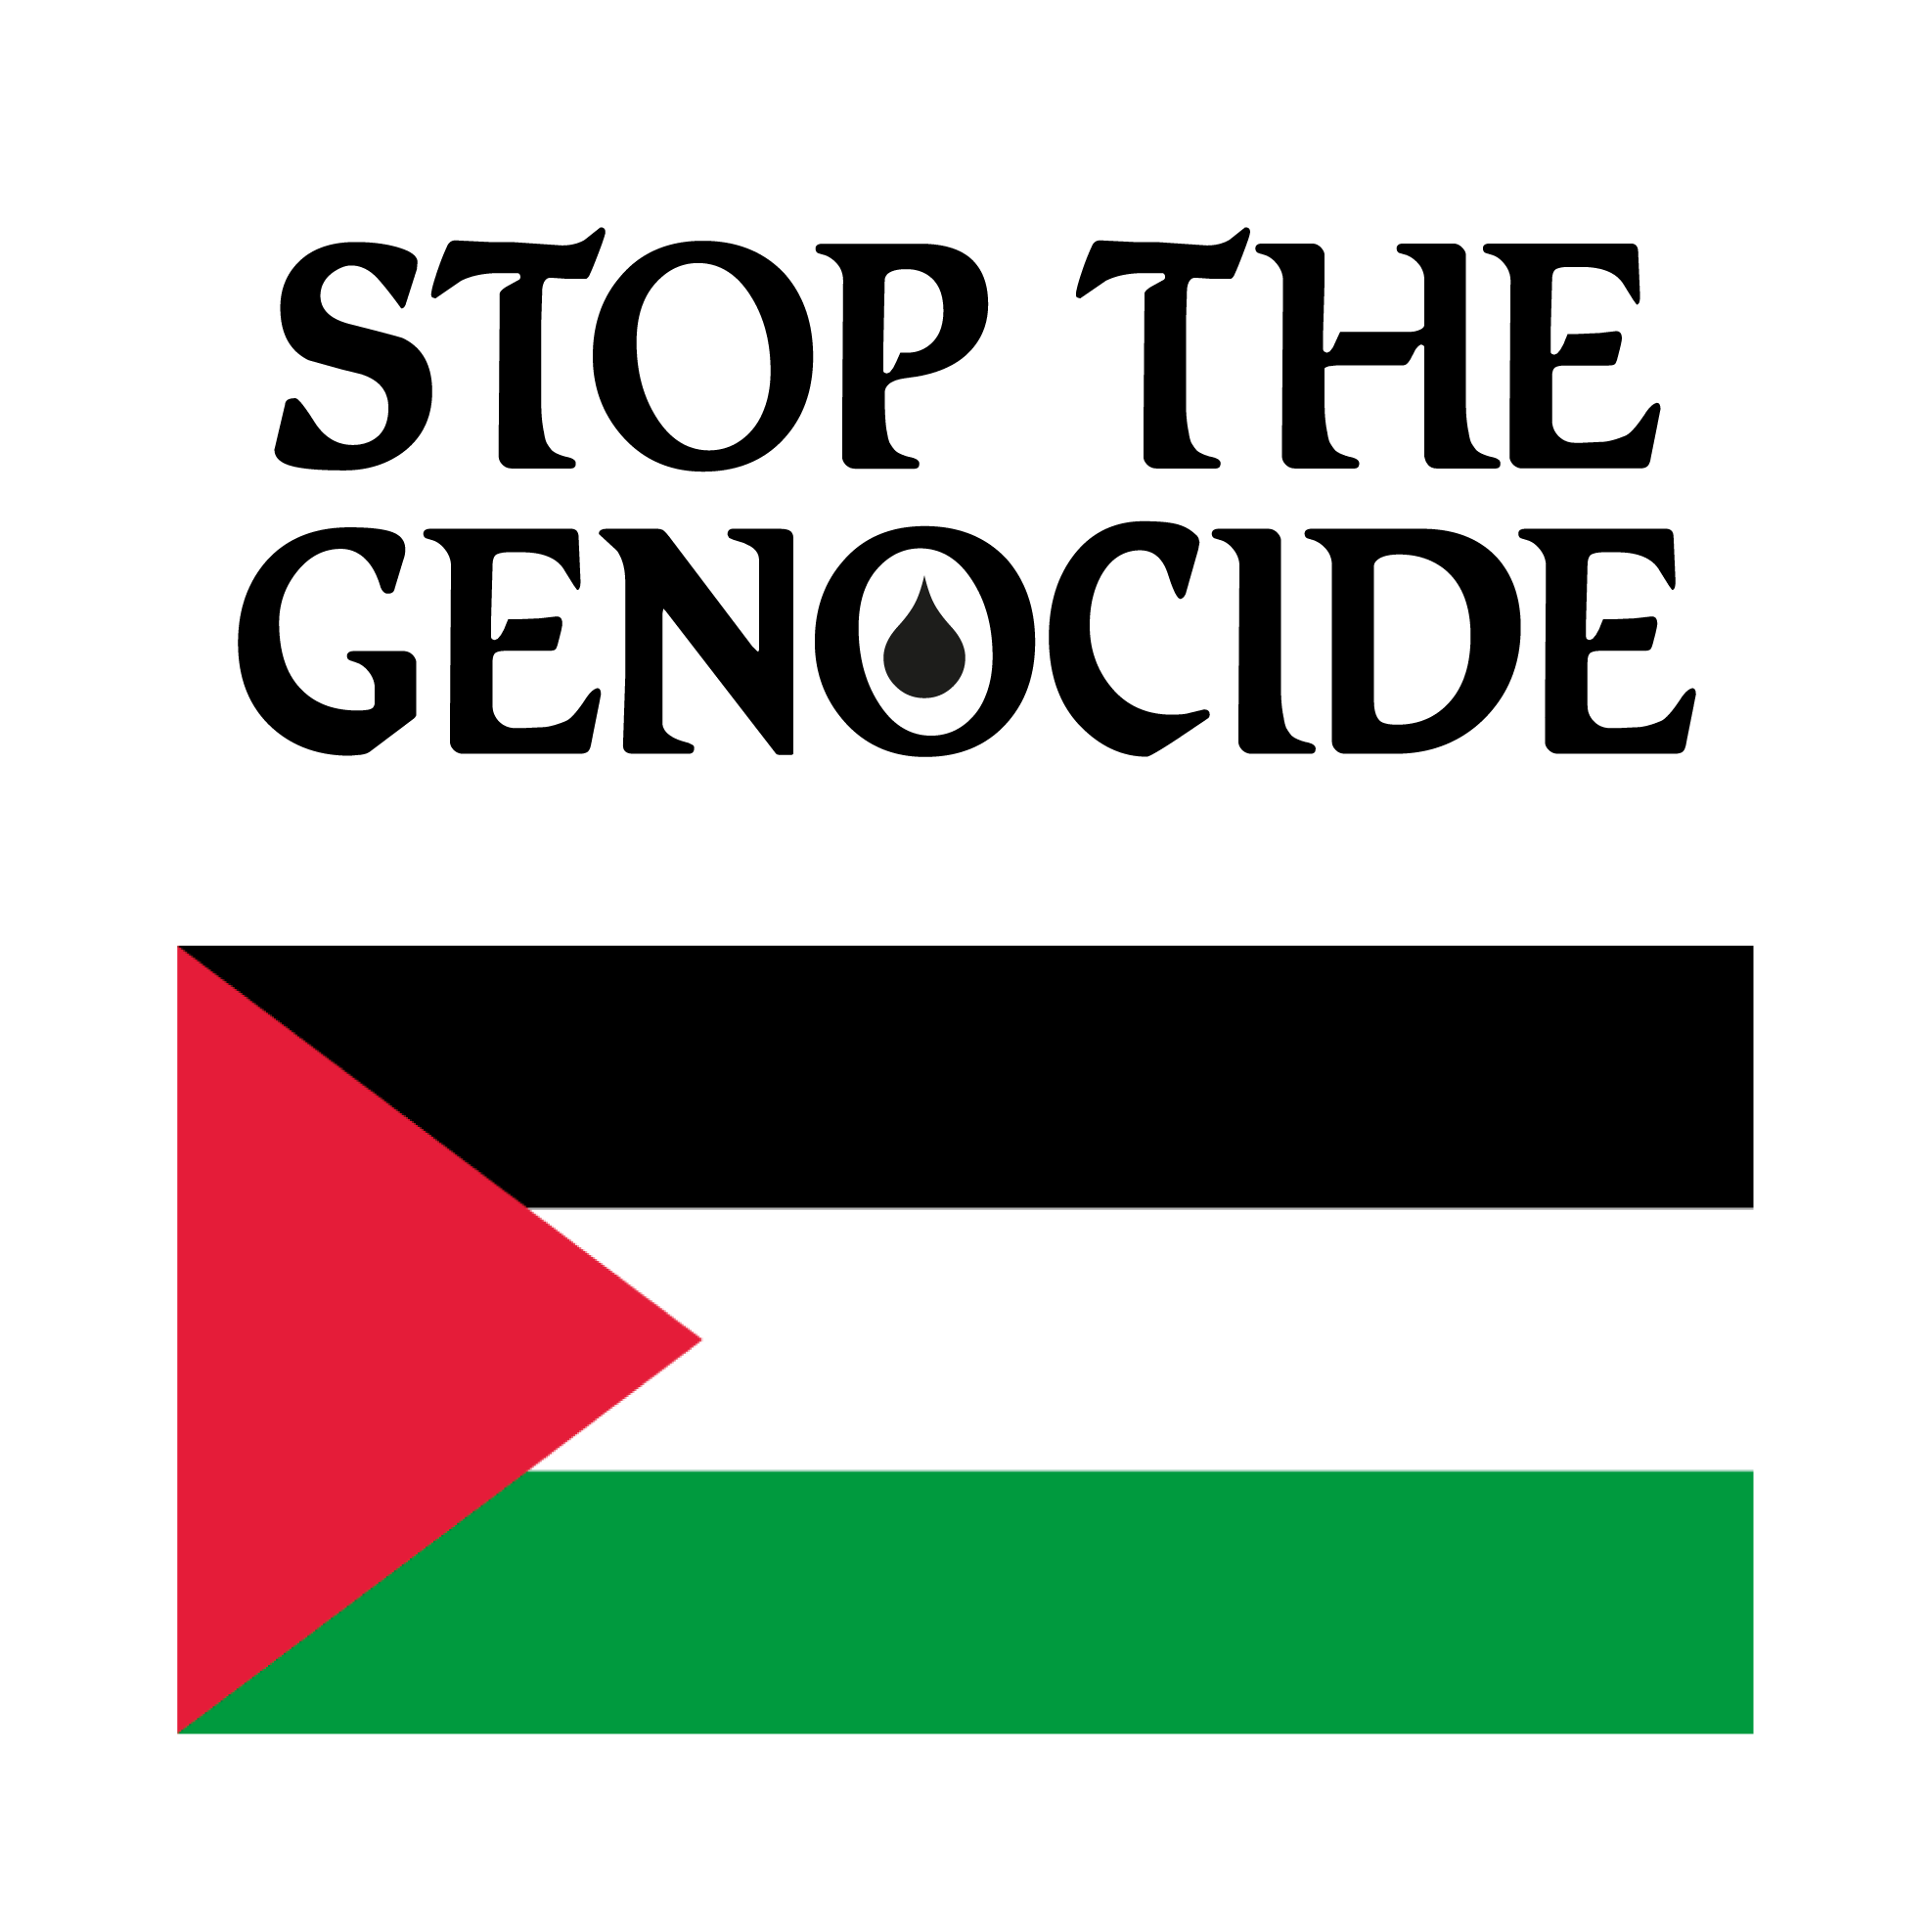 Open-source designs 'Stop Genocide' by Atelier Brenda displaying Palestinian flag and the text Stop the genocide